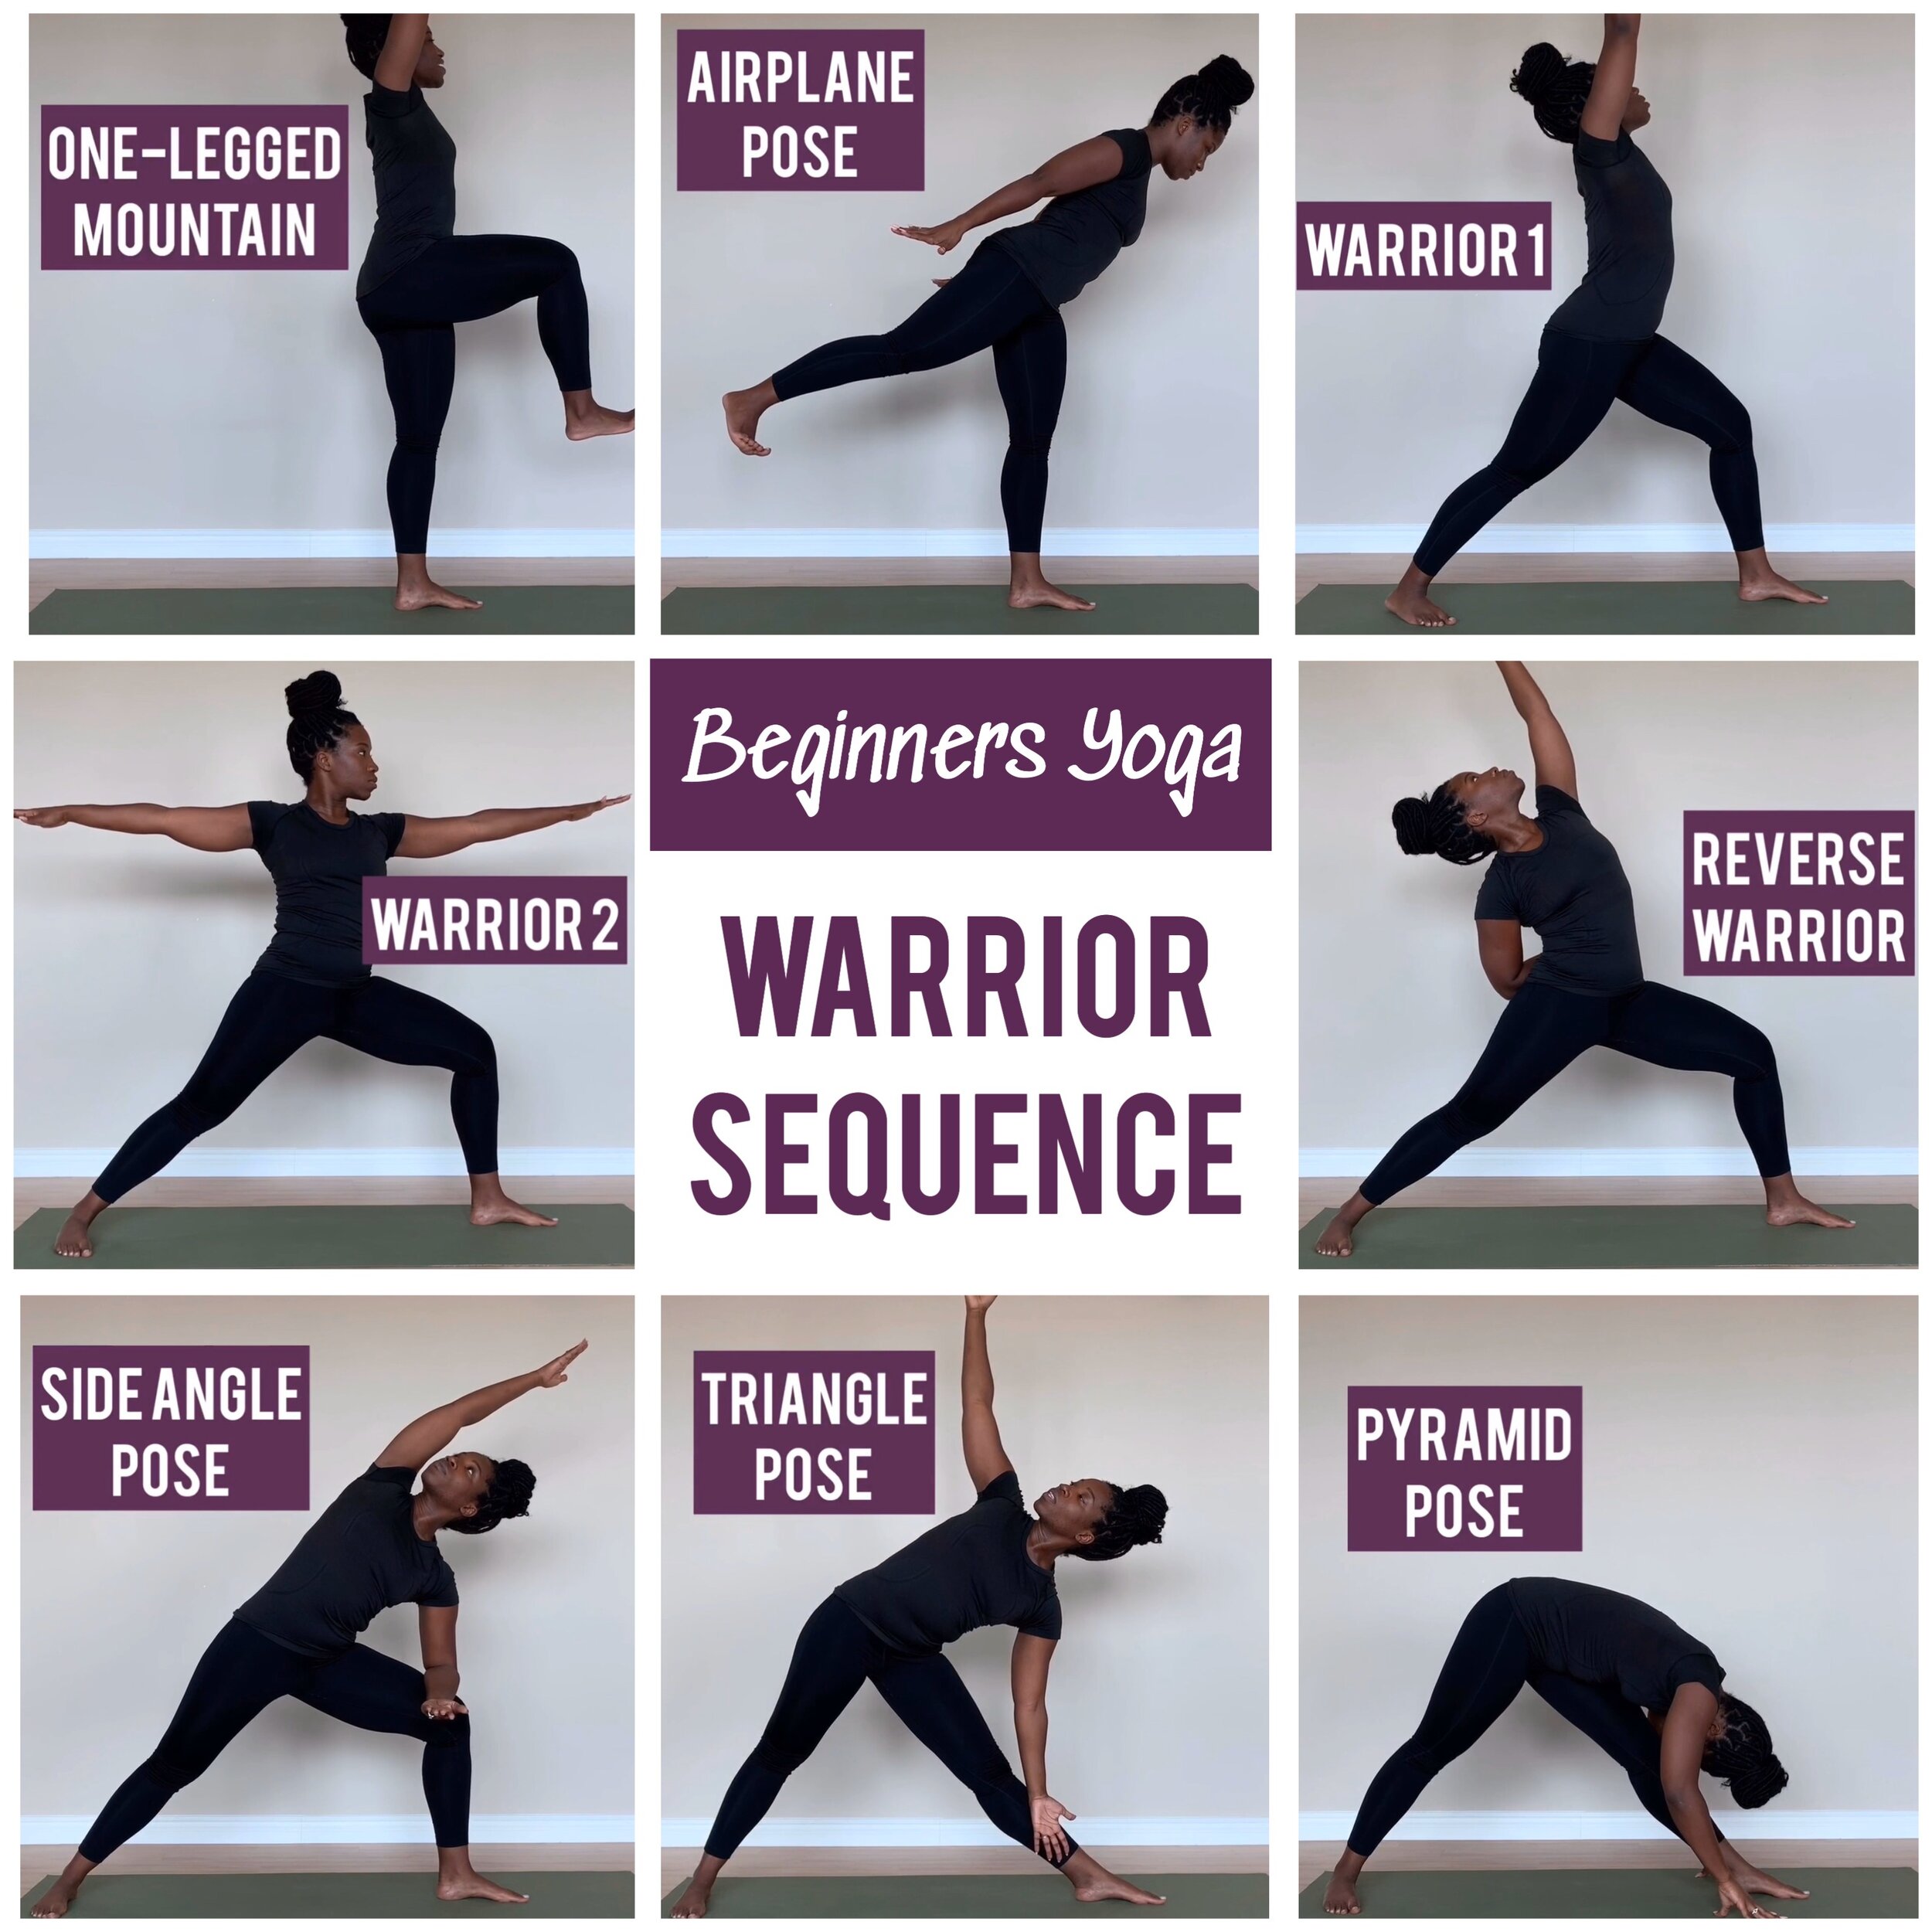 Basic Yoga Sequence For Beginners